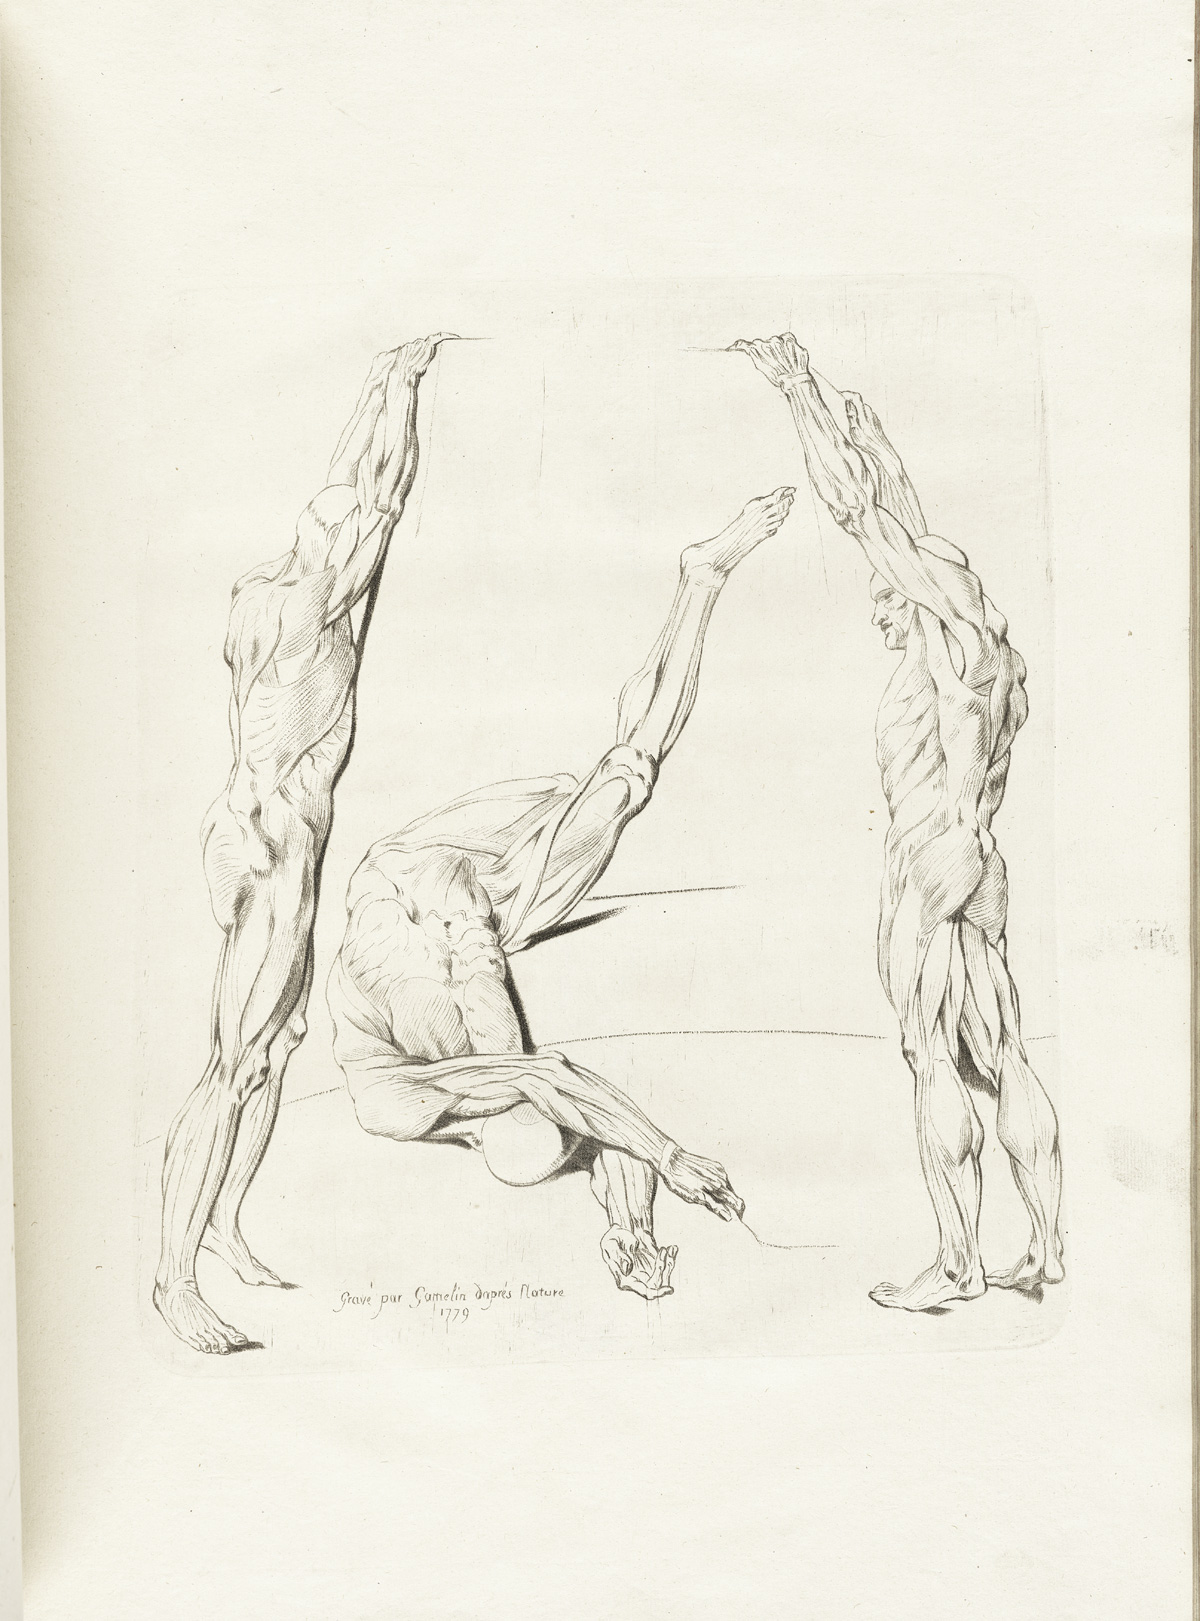 Engraving of three male muscle figures, the two on the right and left viewed from the side with their arms raised straight up, with the middle figure resembling a man fallen to the ground with his head toward the bottom of the page and legs pointing to the top, all with flesh removed to reveal detailed musculature underneath; from Jacques Gamelin’s Nouveau recueil d’osteologie et de myologie, NLM Call no.: WZ 260 G178m 1779.